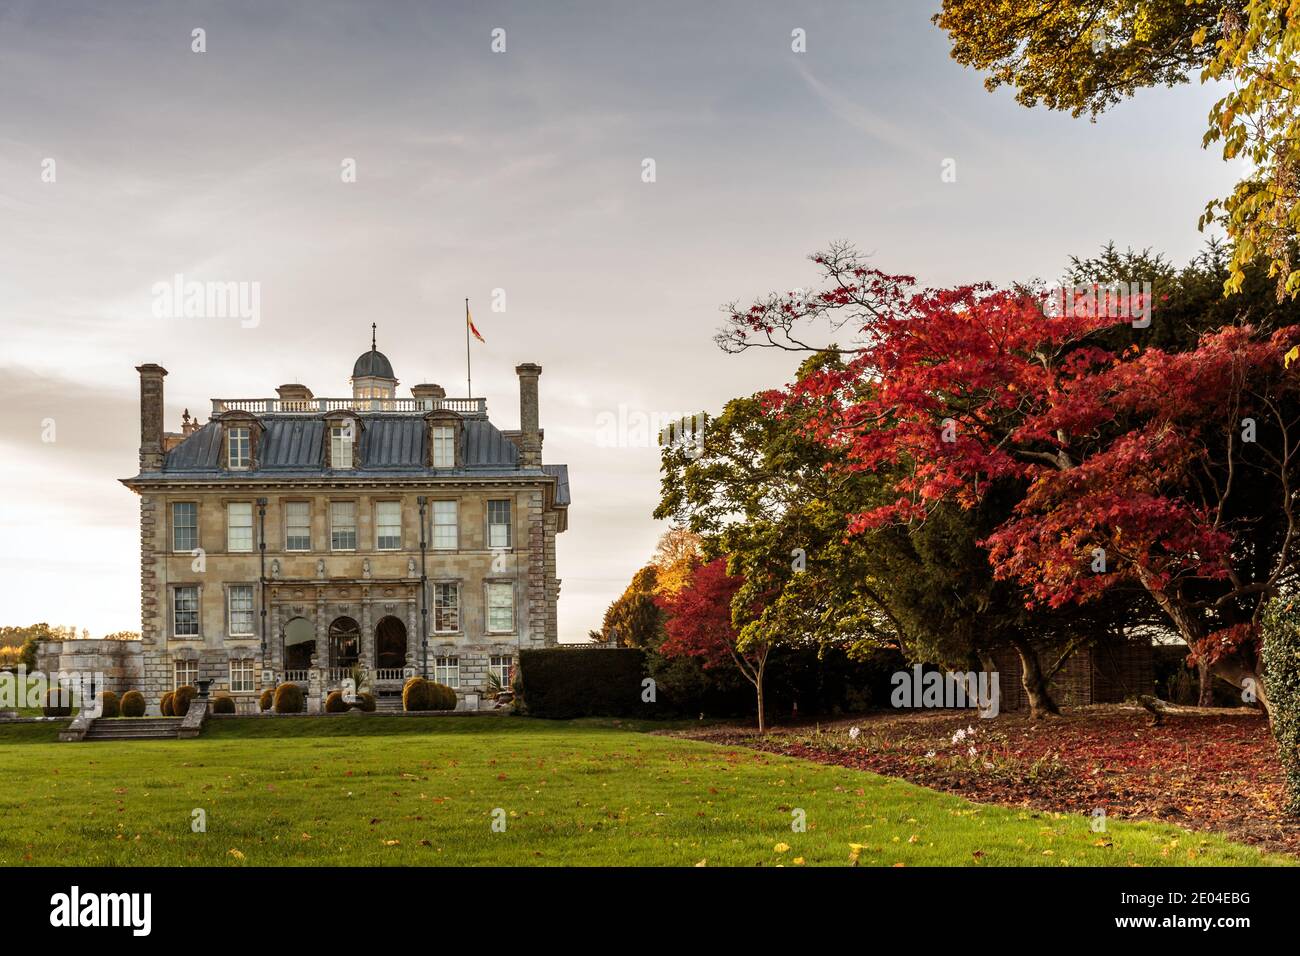 Kingston Lacy house and gardens, a country house and estate near Wimborne Minster, Dorset. Stock Photo